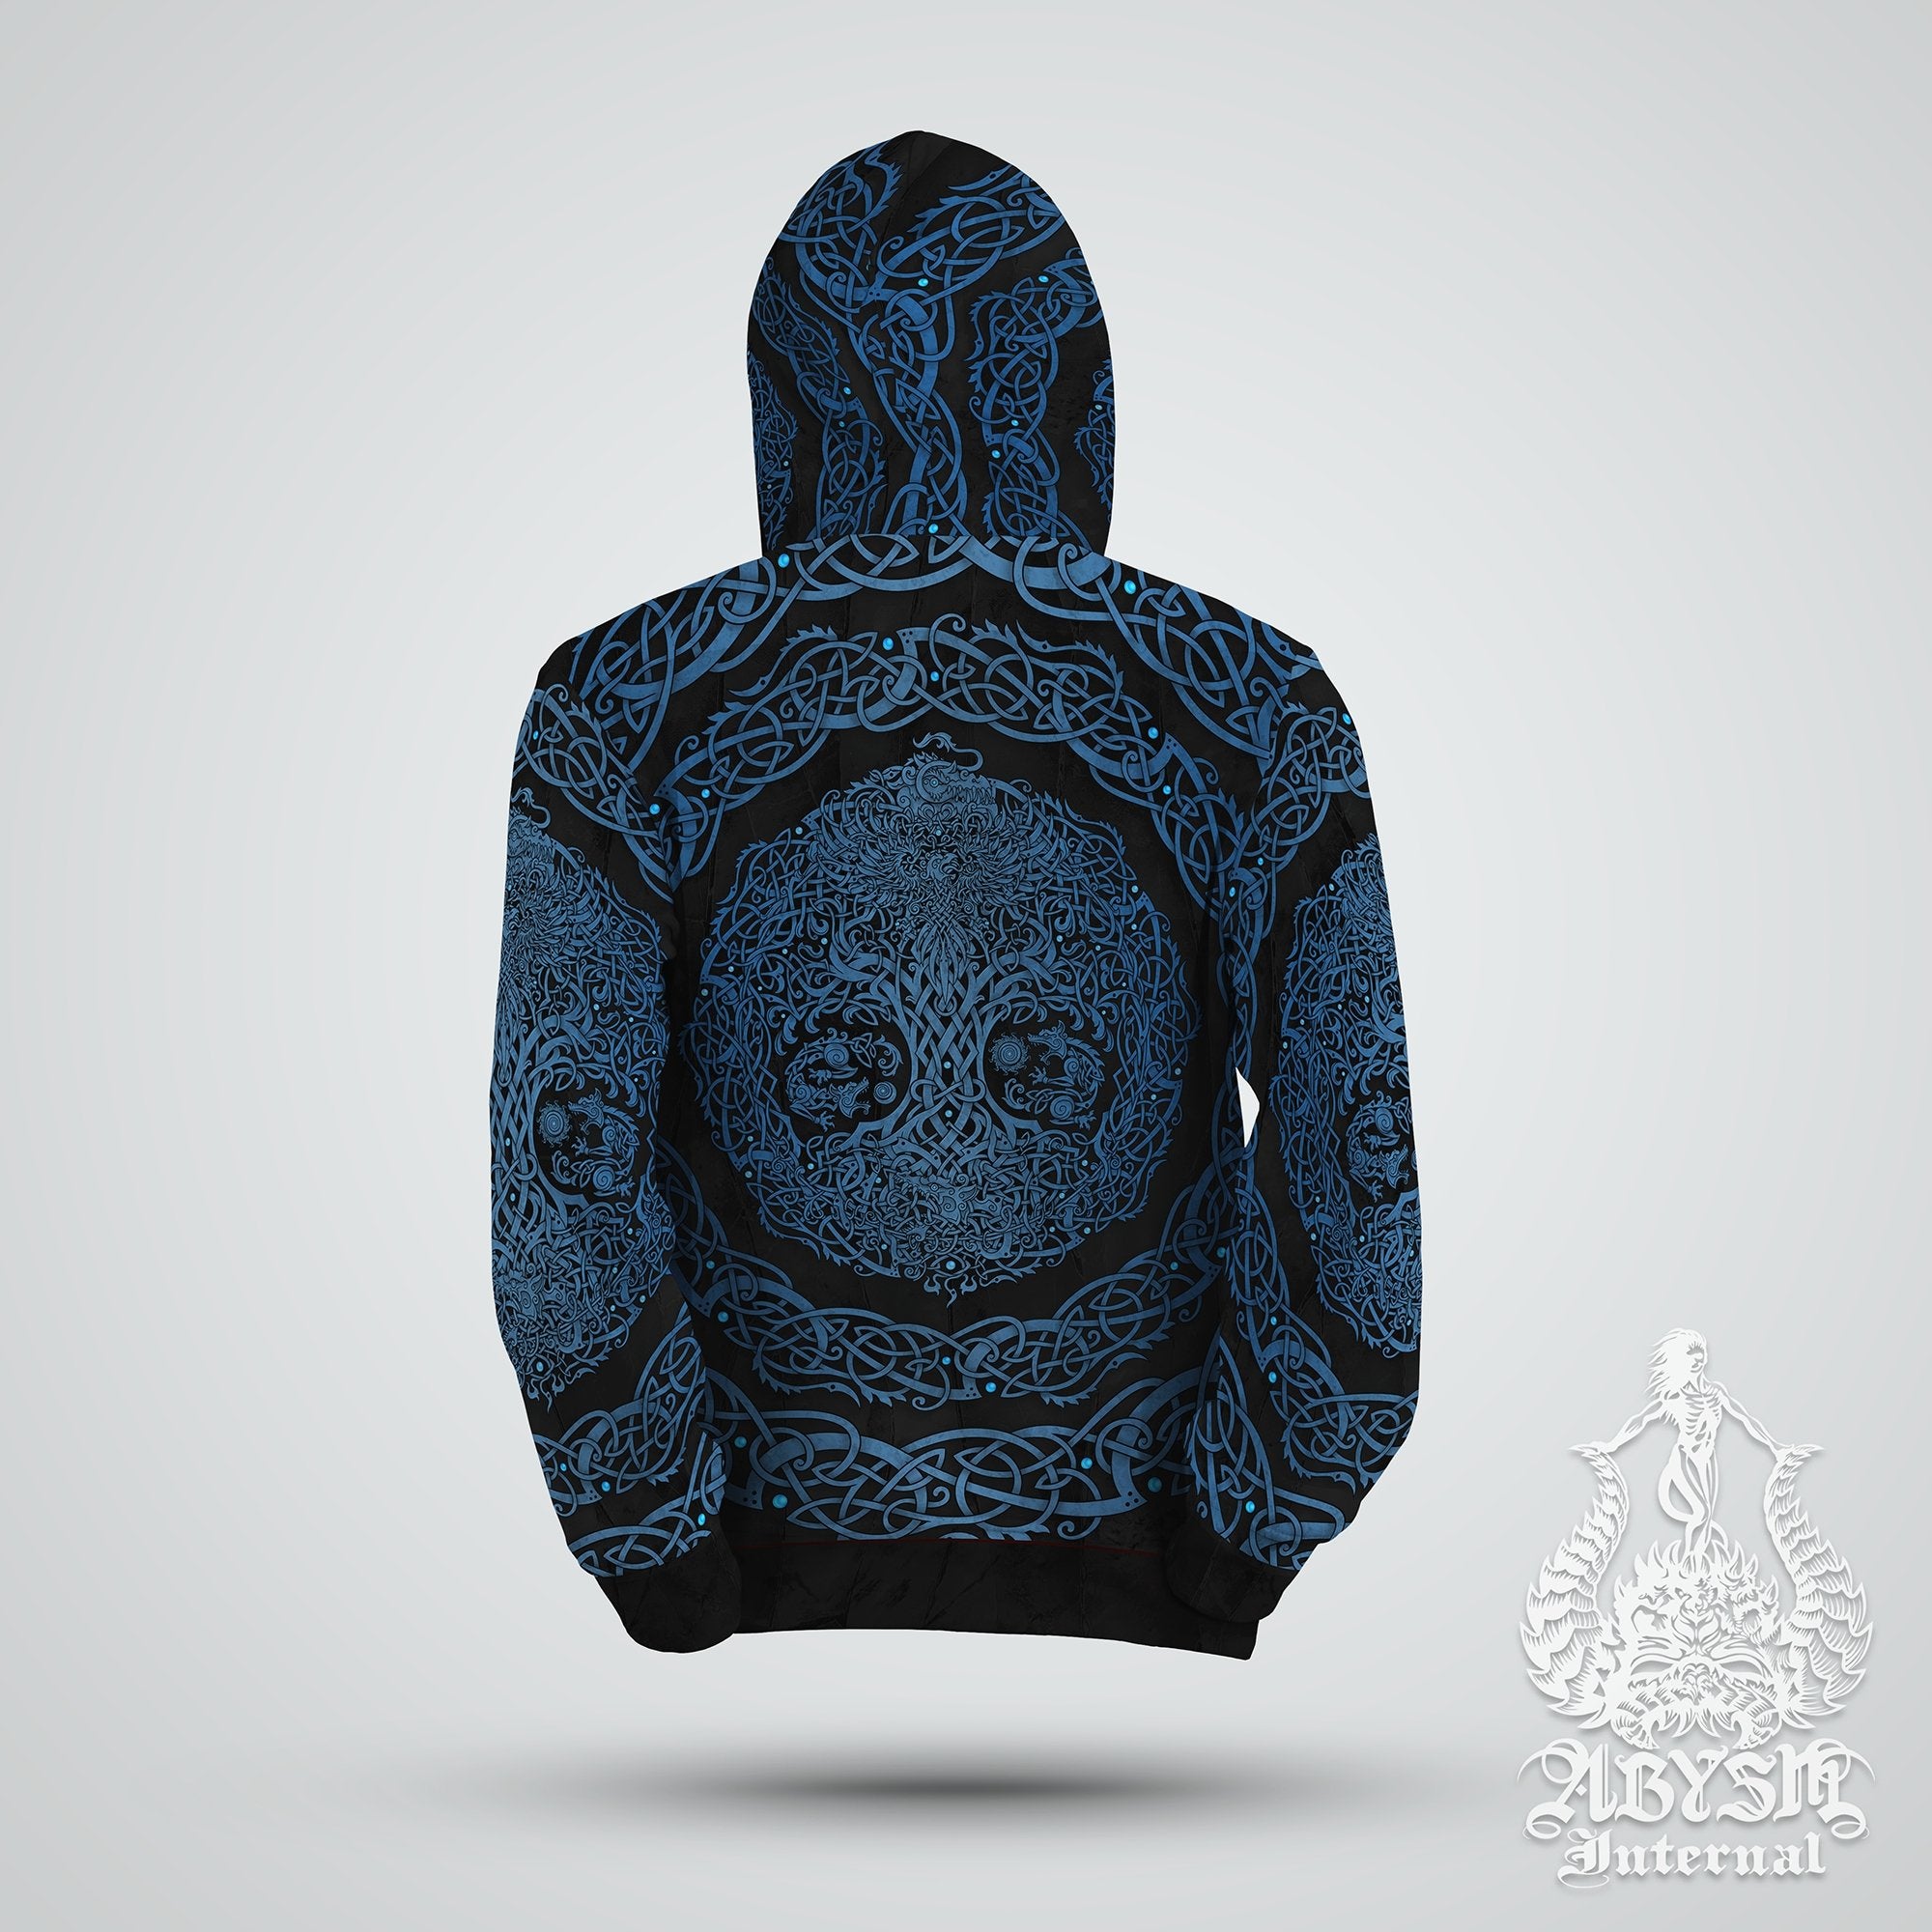 Yggdrasil Hoodie, Viking Sweater, Concert Outfit, Norse Tree of Life, Nordic Art Streetwear, Alternative Clothing, Unisex - Black and Blue - Abysm Internal